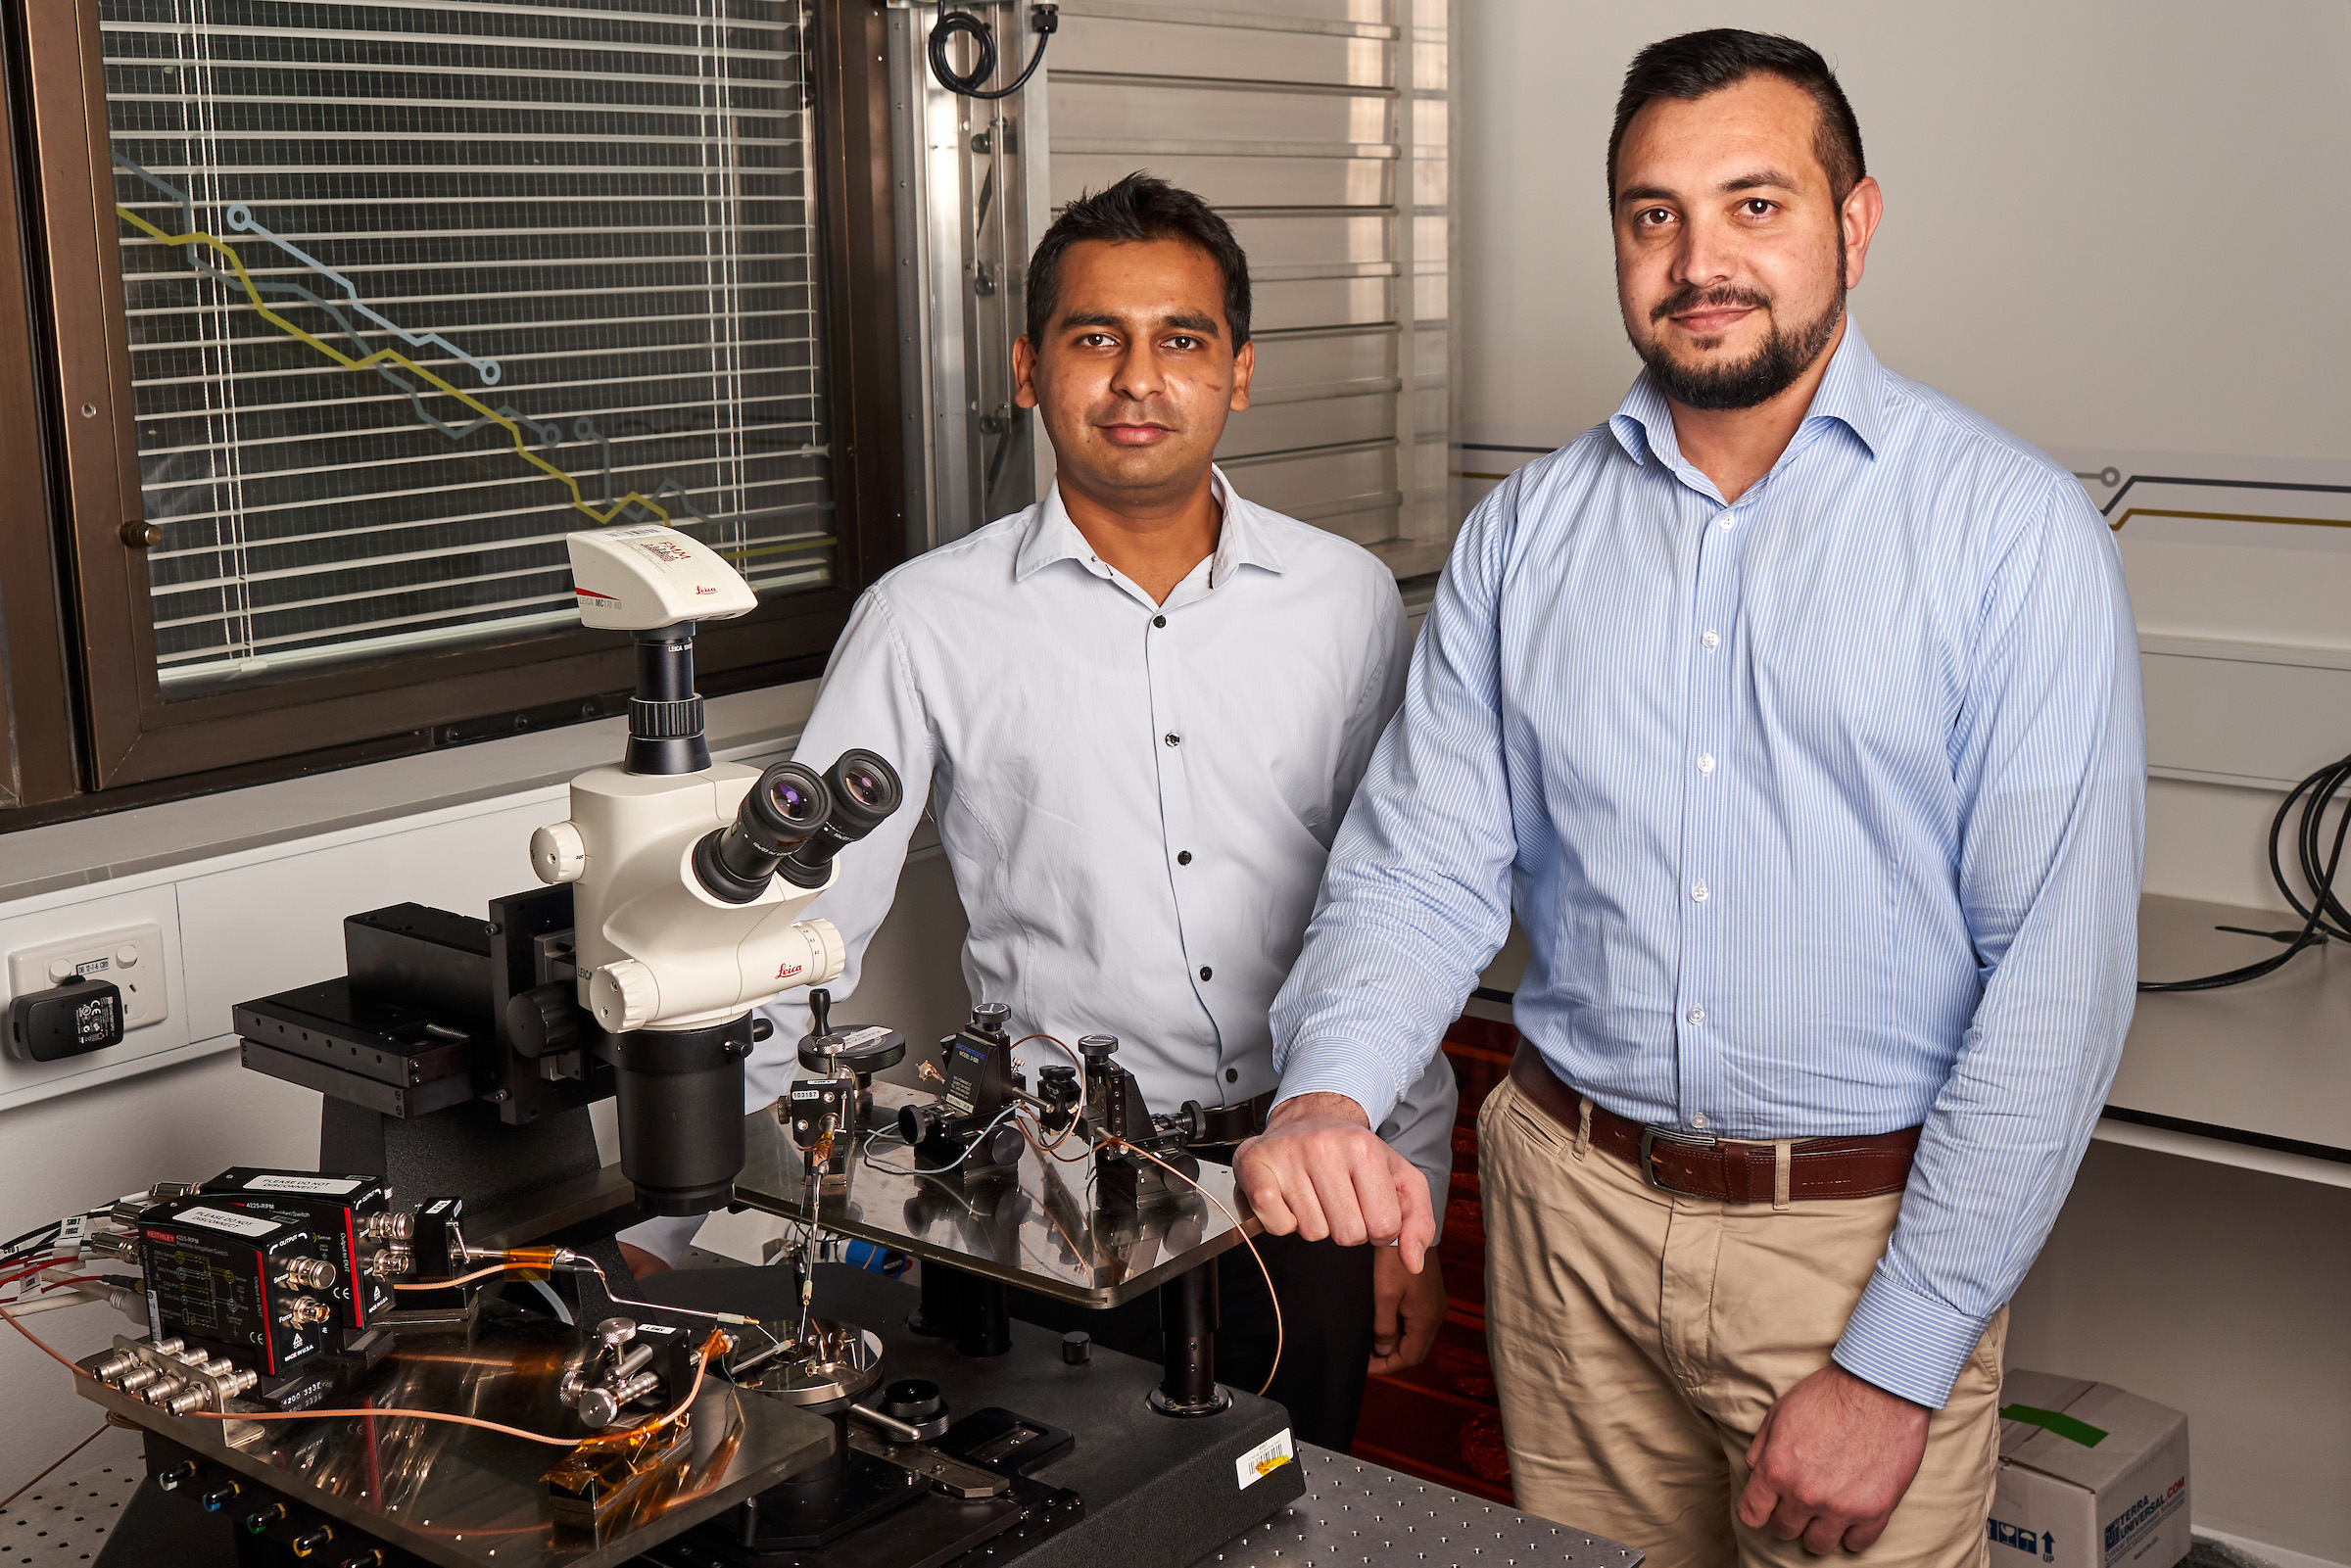 Researchers Dr Sumeet Walia and Dr Taimur Ahmed